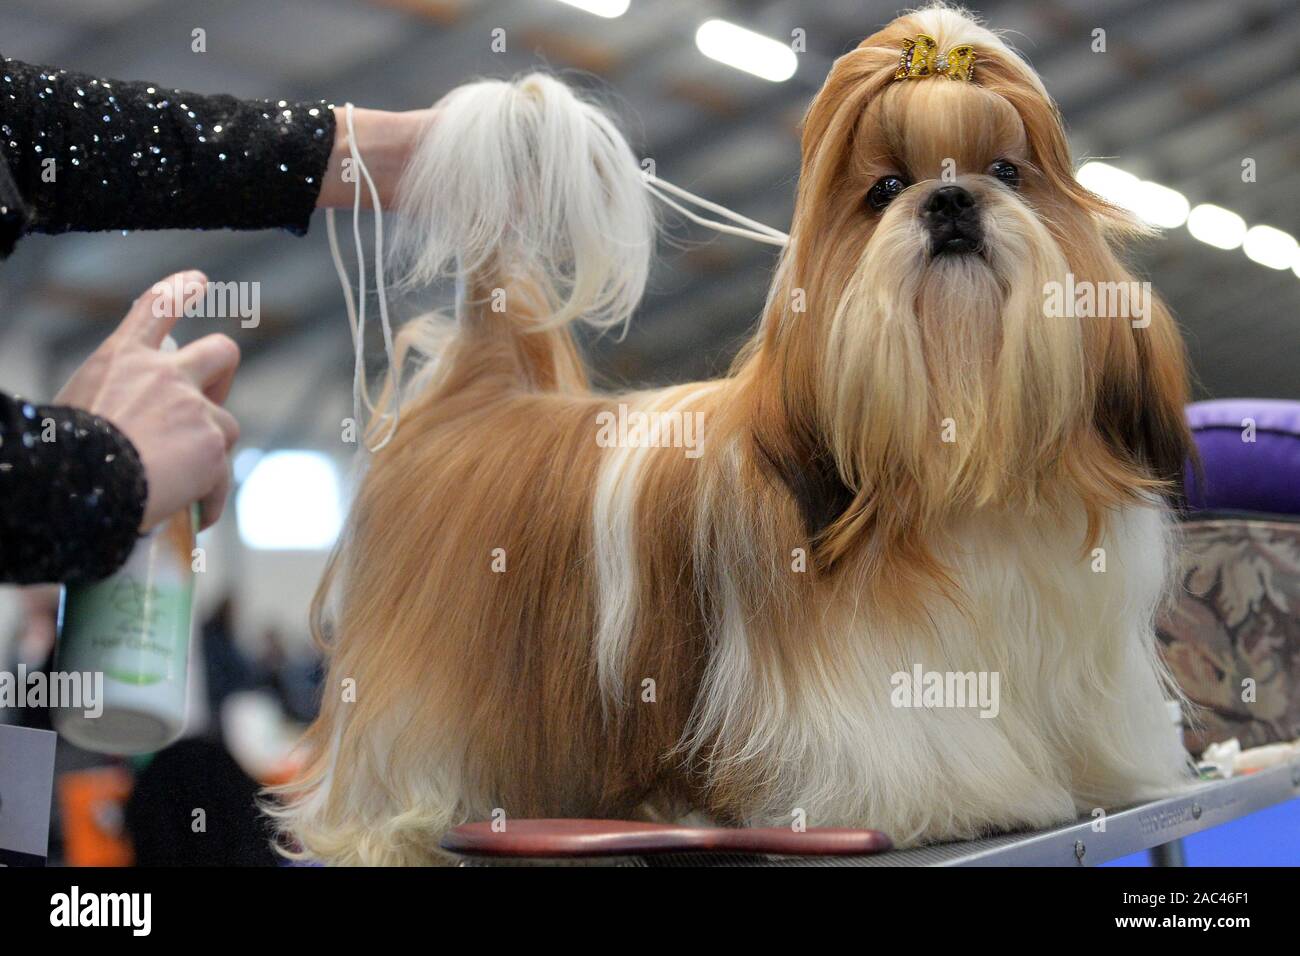 Prague, Czech Republic. 30th Nov, 2019. A participant prepare his dog during the International Prague Expo Dog in Prague, Czech Republic. More than 1200 dogs from ten countries are evaluated during a two day Prague Expo Dog show and competition. Around 1200 dogs from 200 different breeds compete in Prague to be judged by international judges. Credit: Slavek Ruta/ZUMA Wire/Alamy Live News Stock Photo